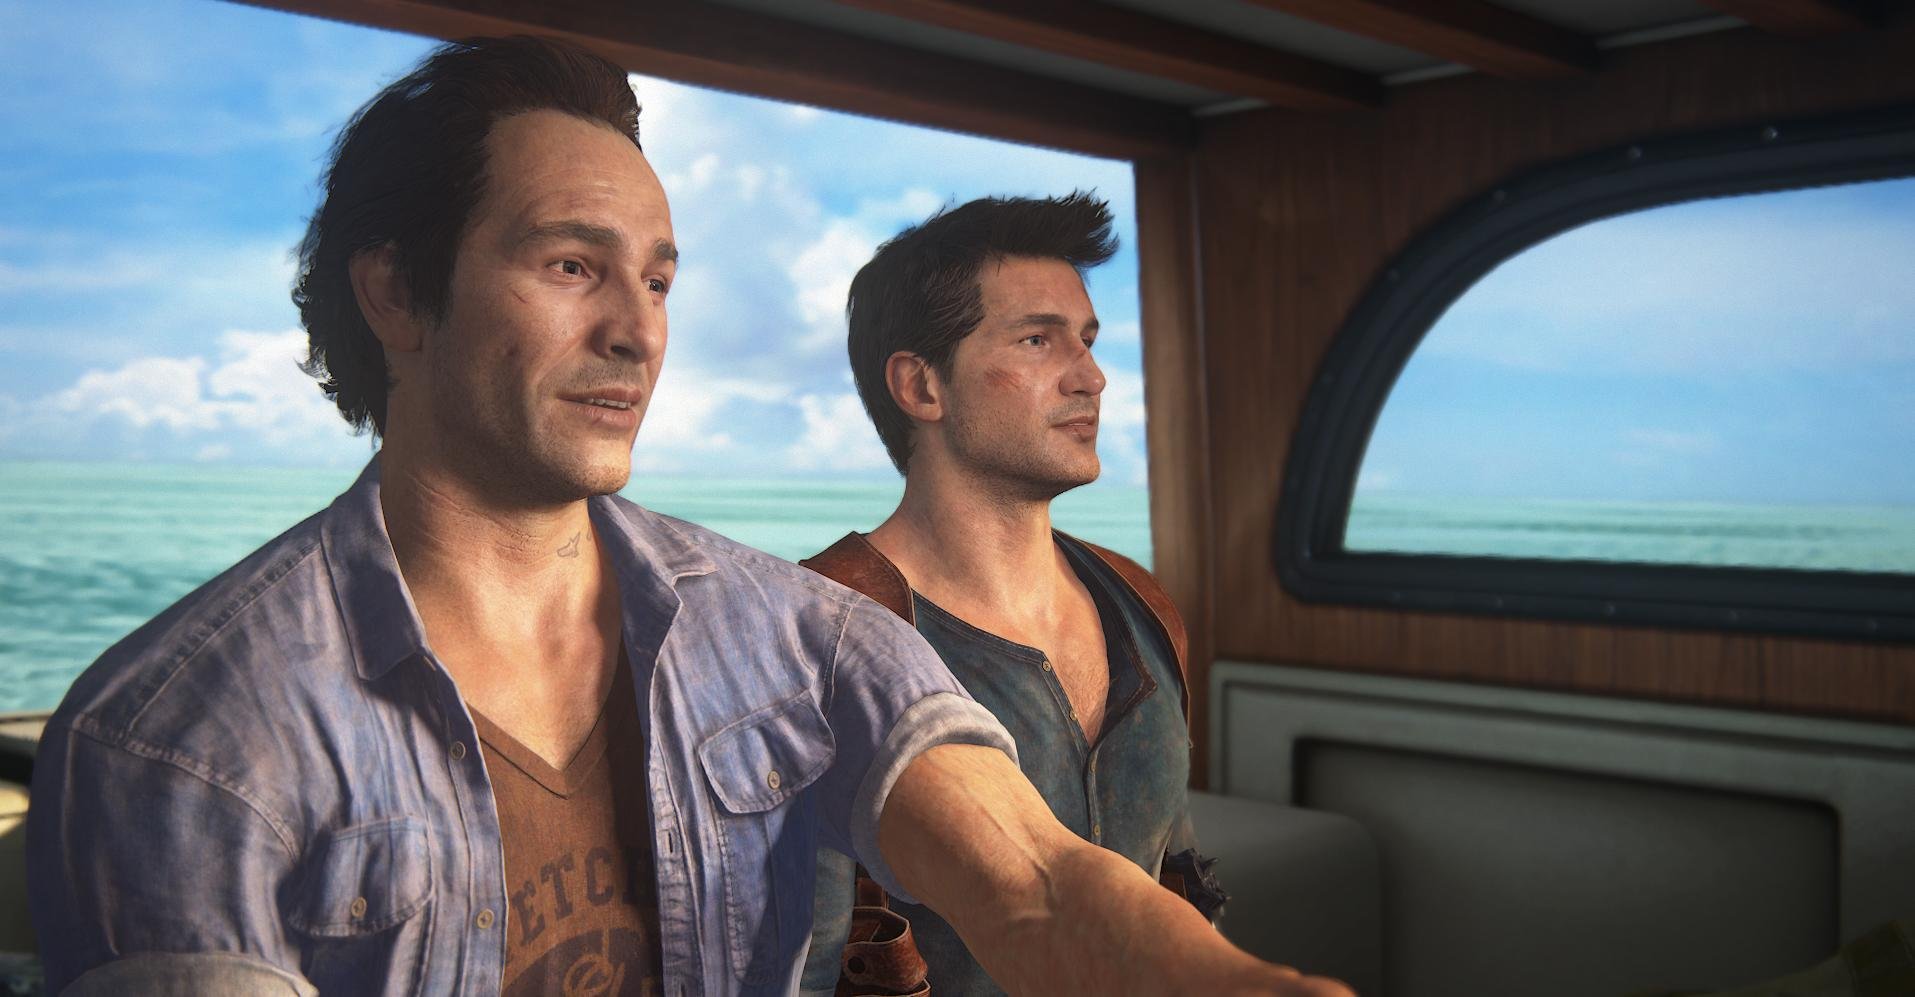 Uncharted 4: A Thief's End (PS4) Review – ZTGD